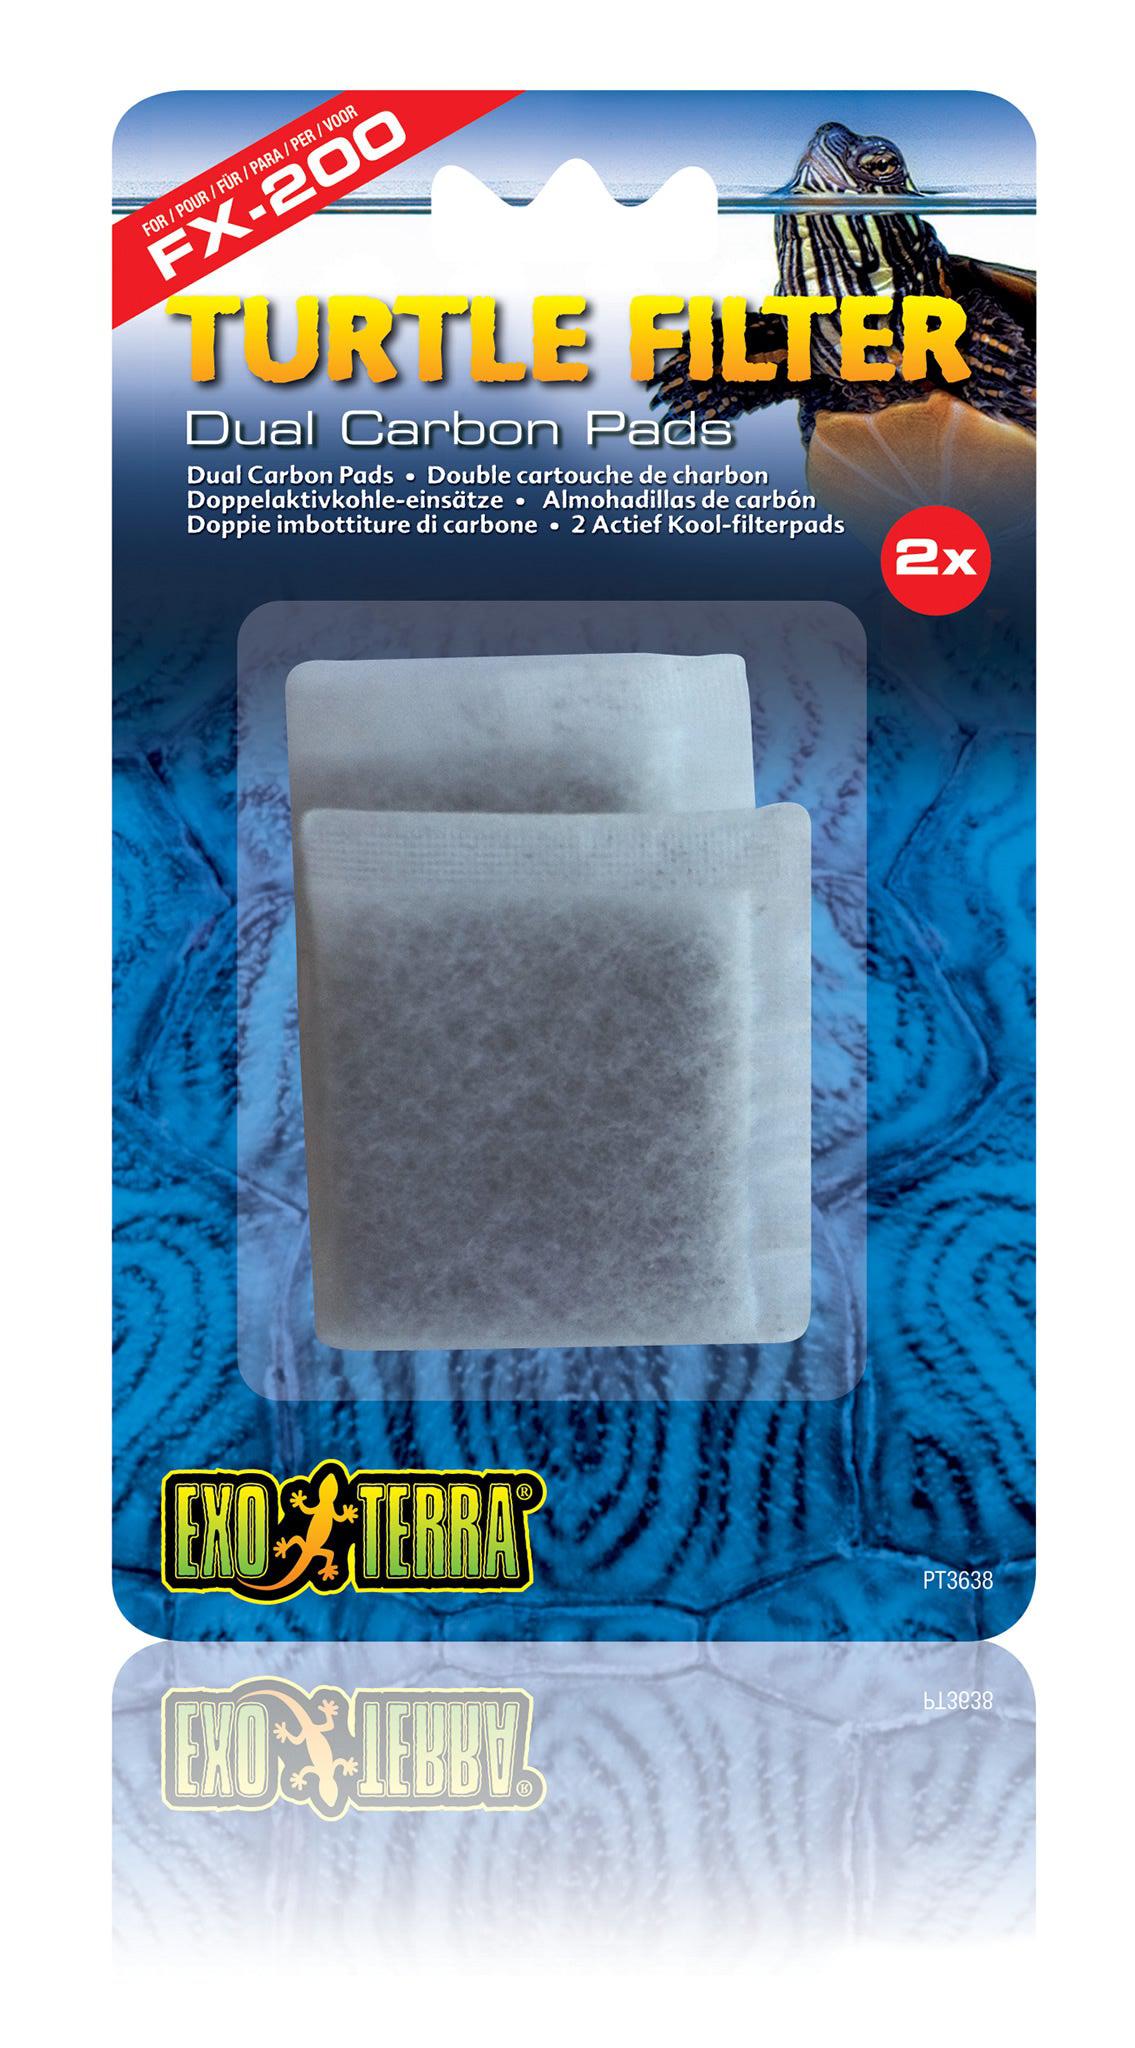 Exo Terra Carbon Pads for FX200 Filter